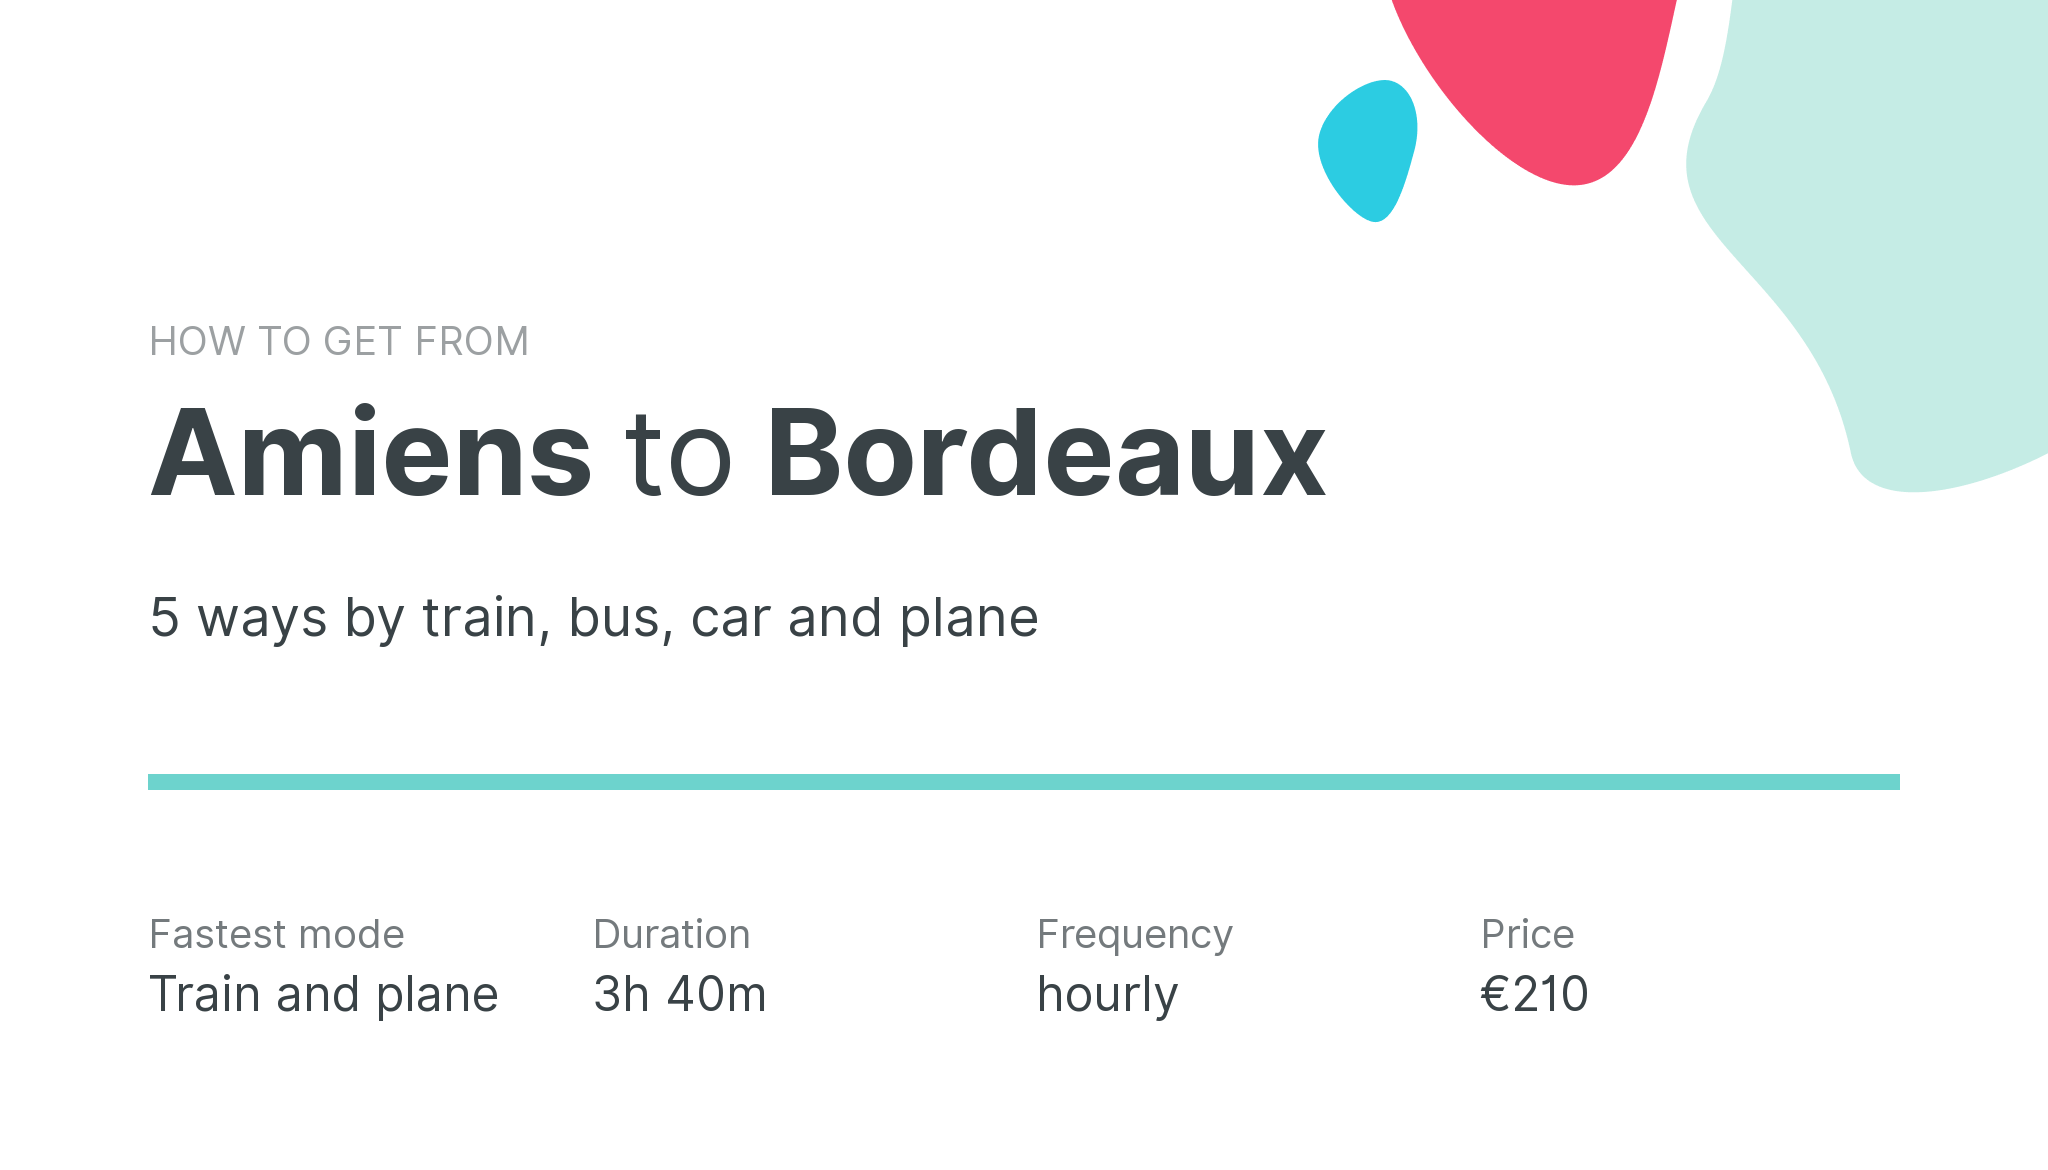 How do I get from Amiens to Bordeaux